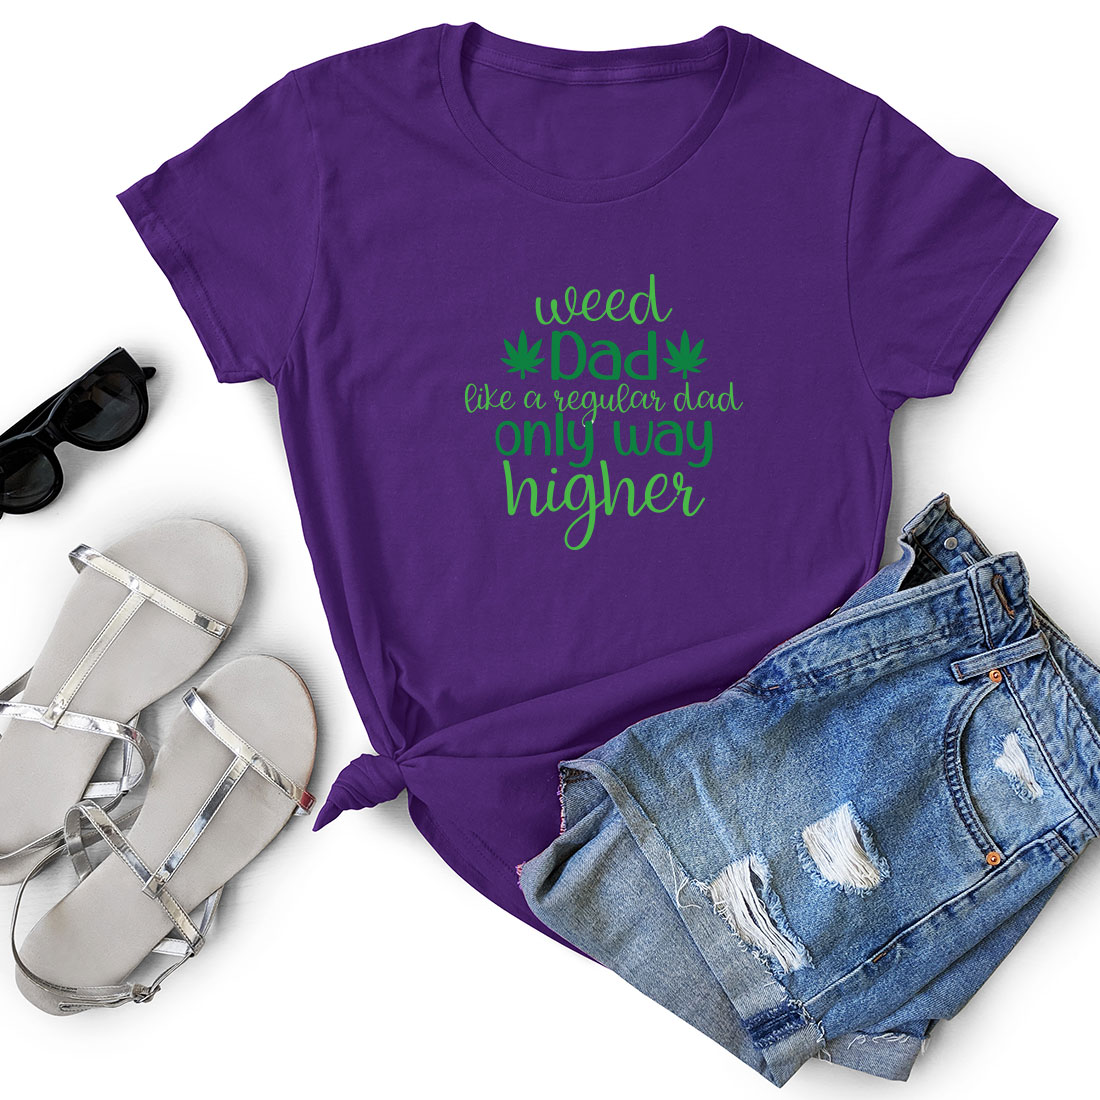 T - shirt that says weed is a bright idea.